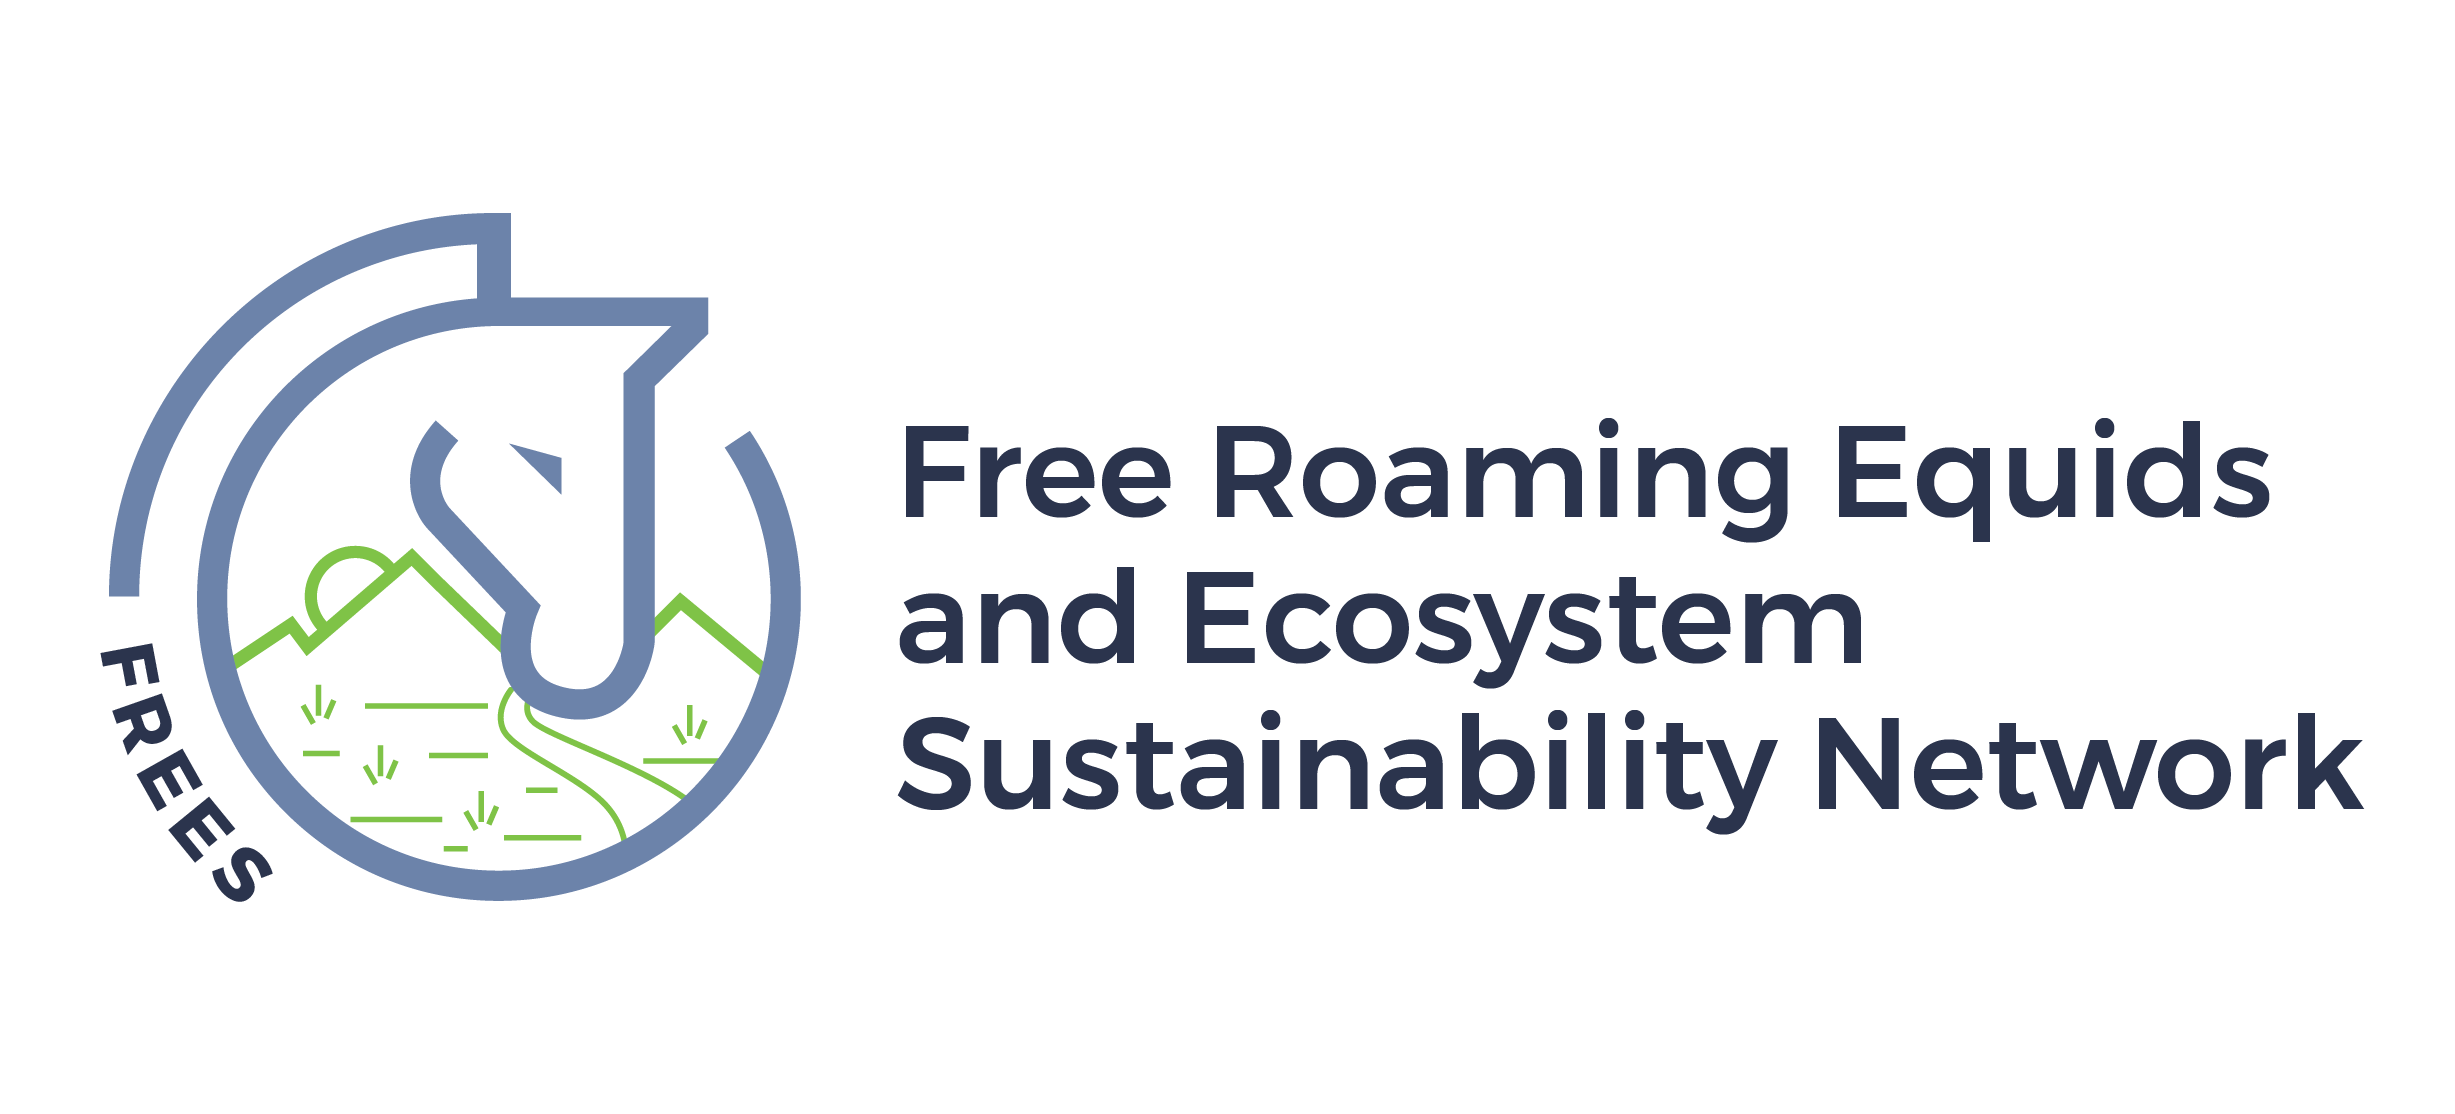 Free Roaming Equids and Ecosystem Sustainability Network